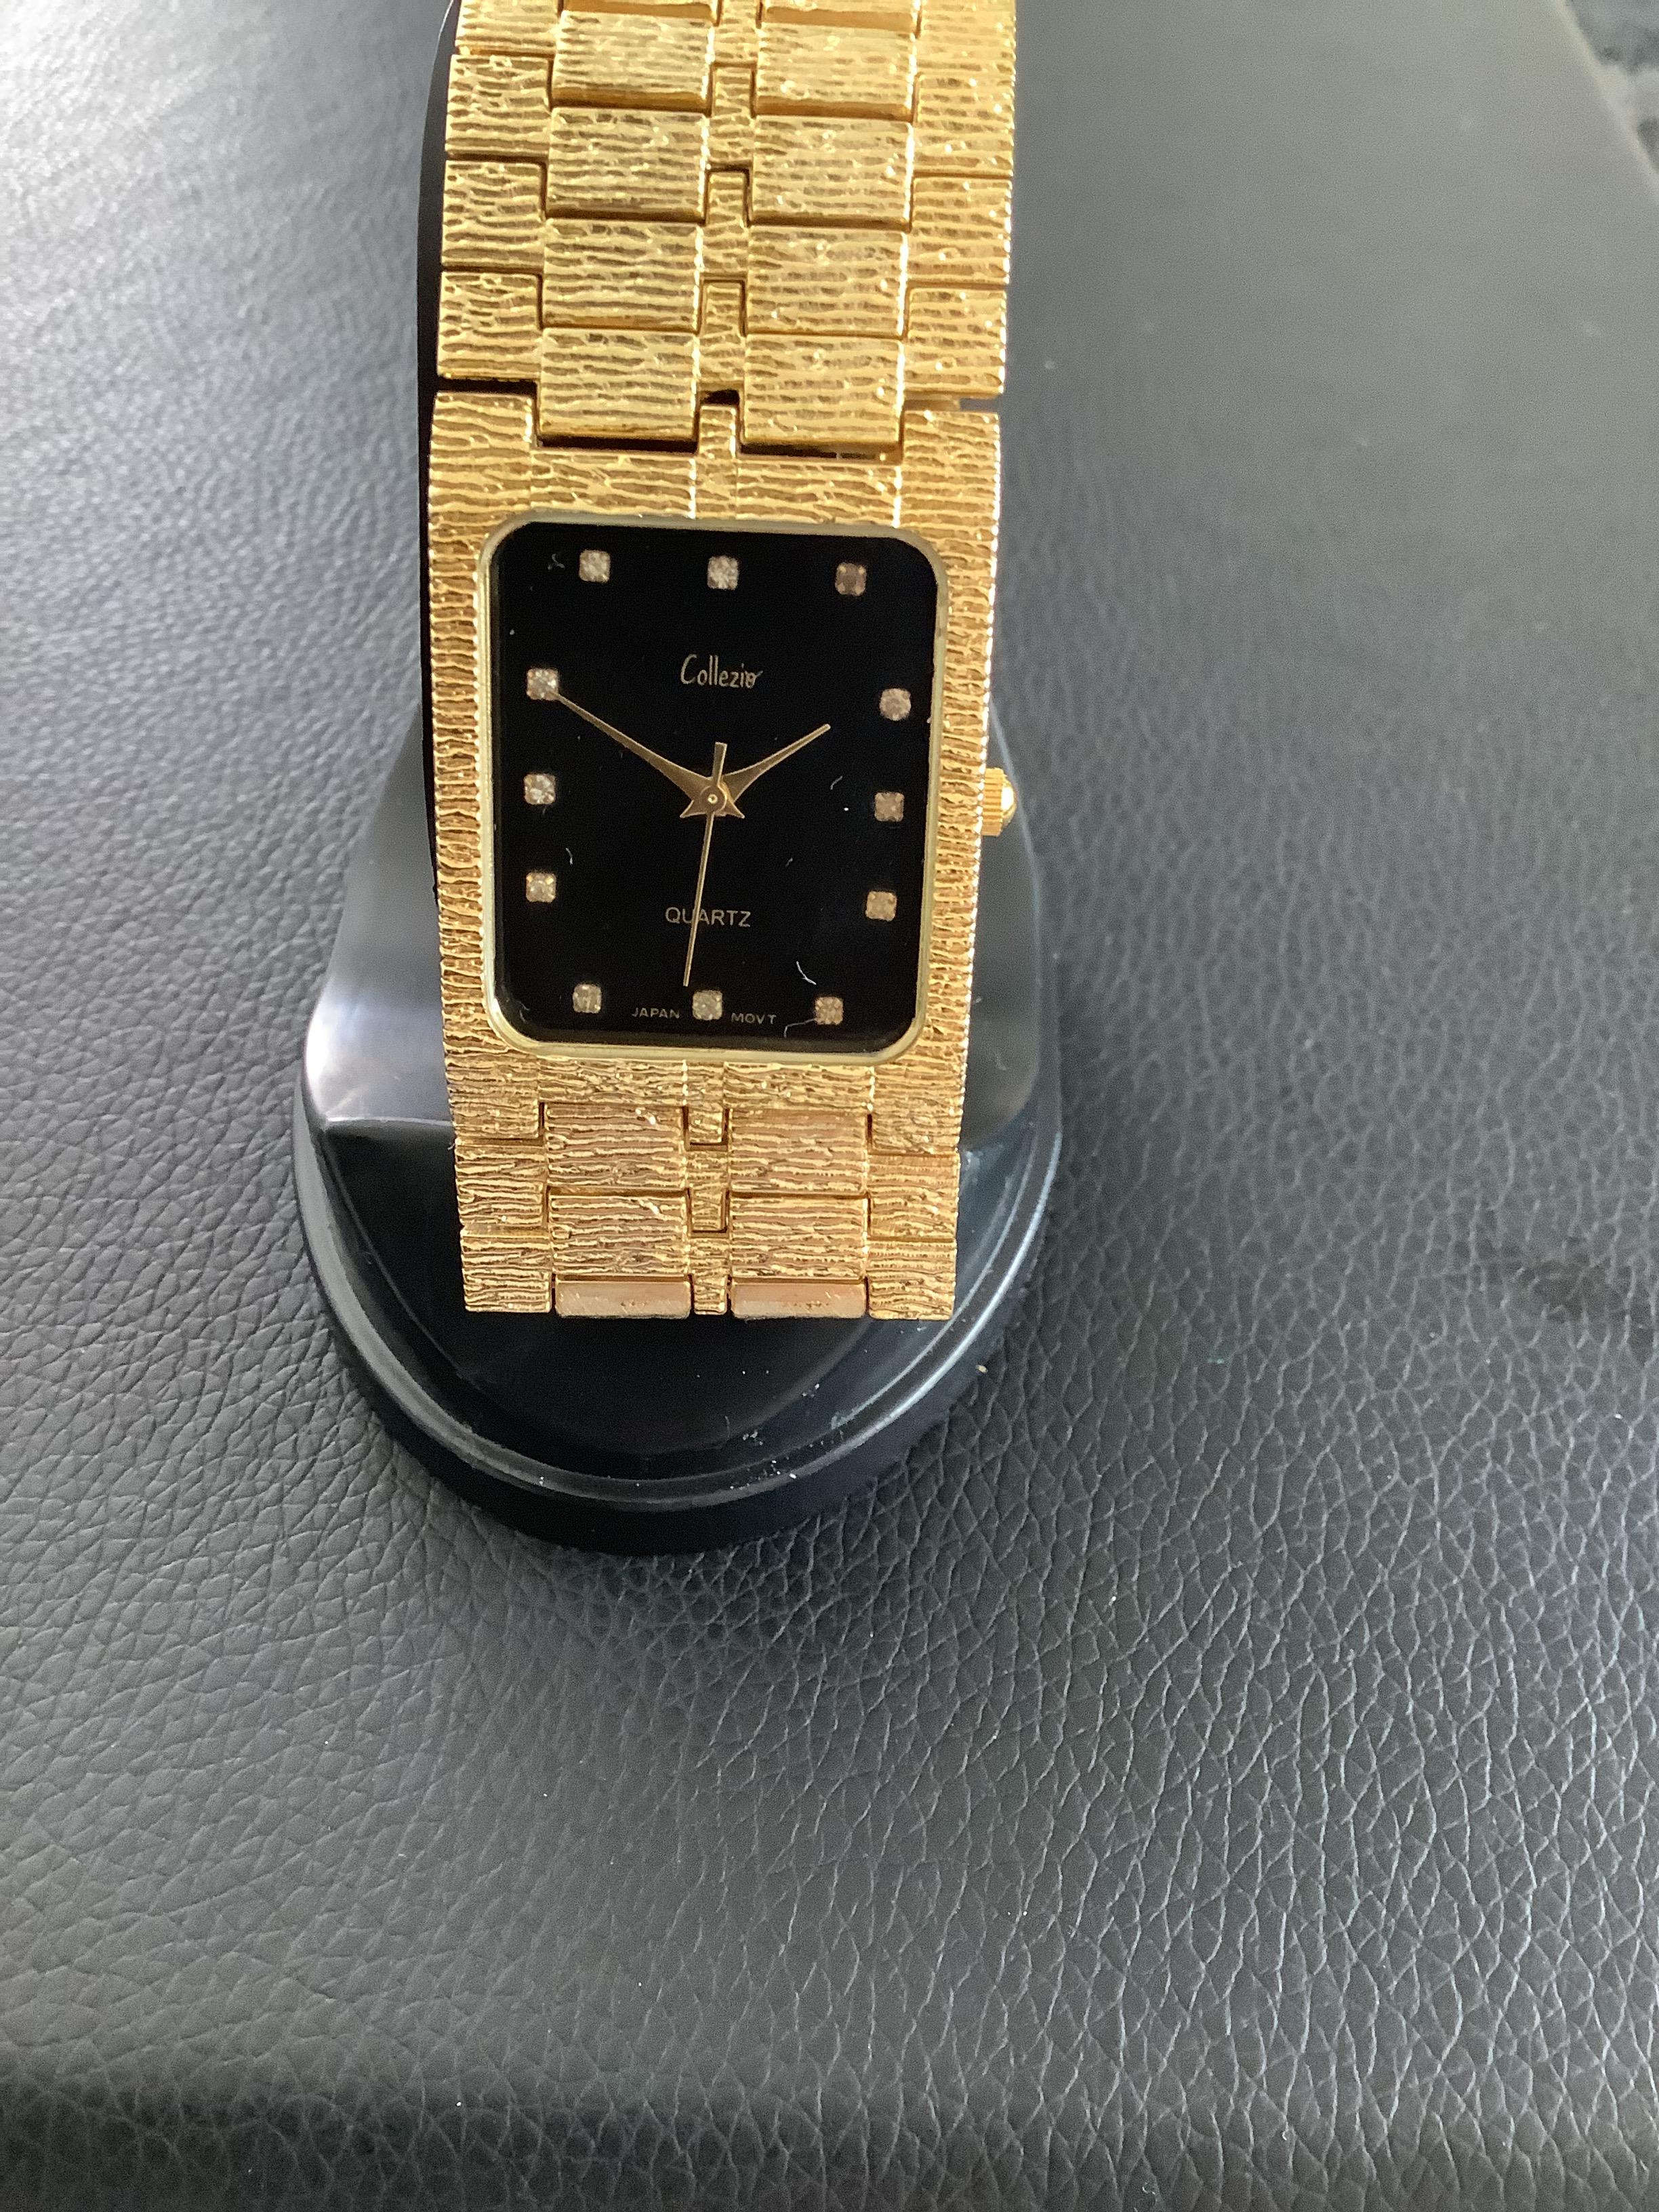 Beautiful Gold Plated Collezie Unisex Diamante Wristwatch (GS 144) This is a beautiful Gold